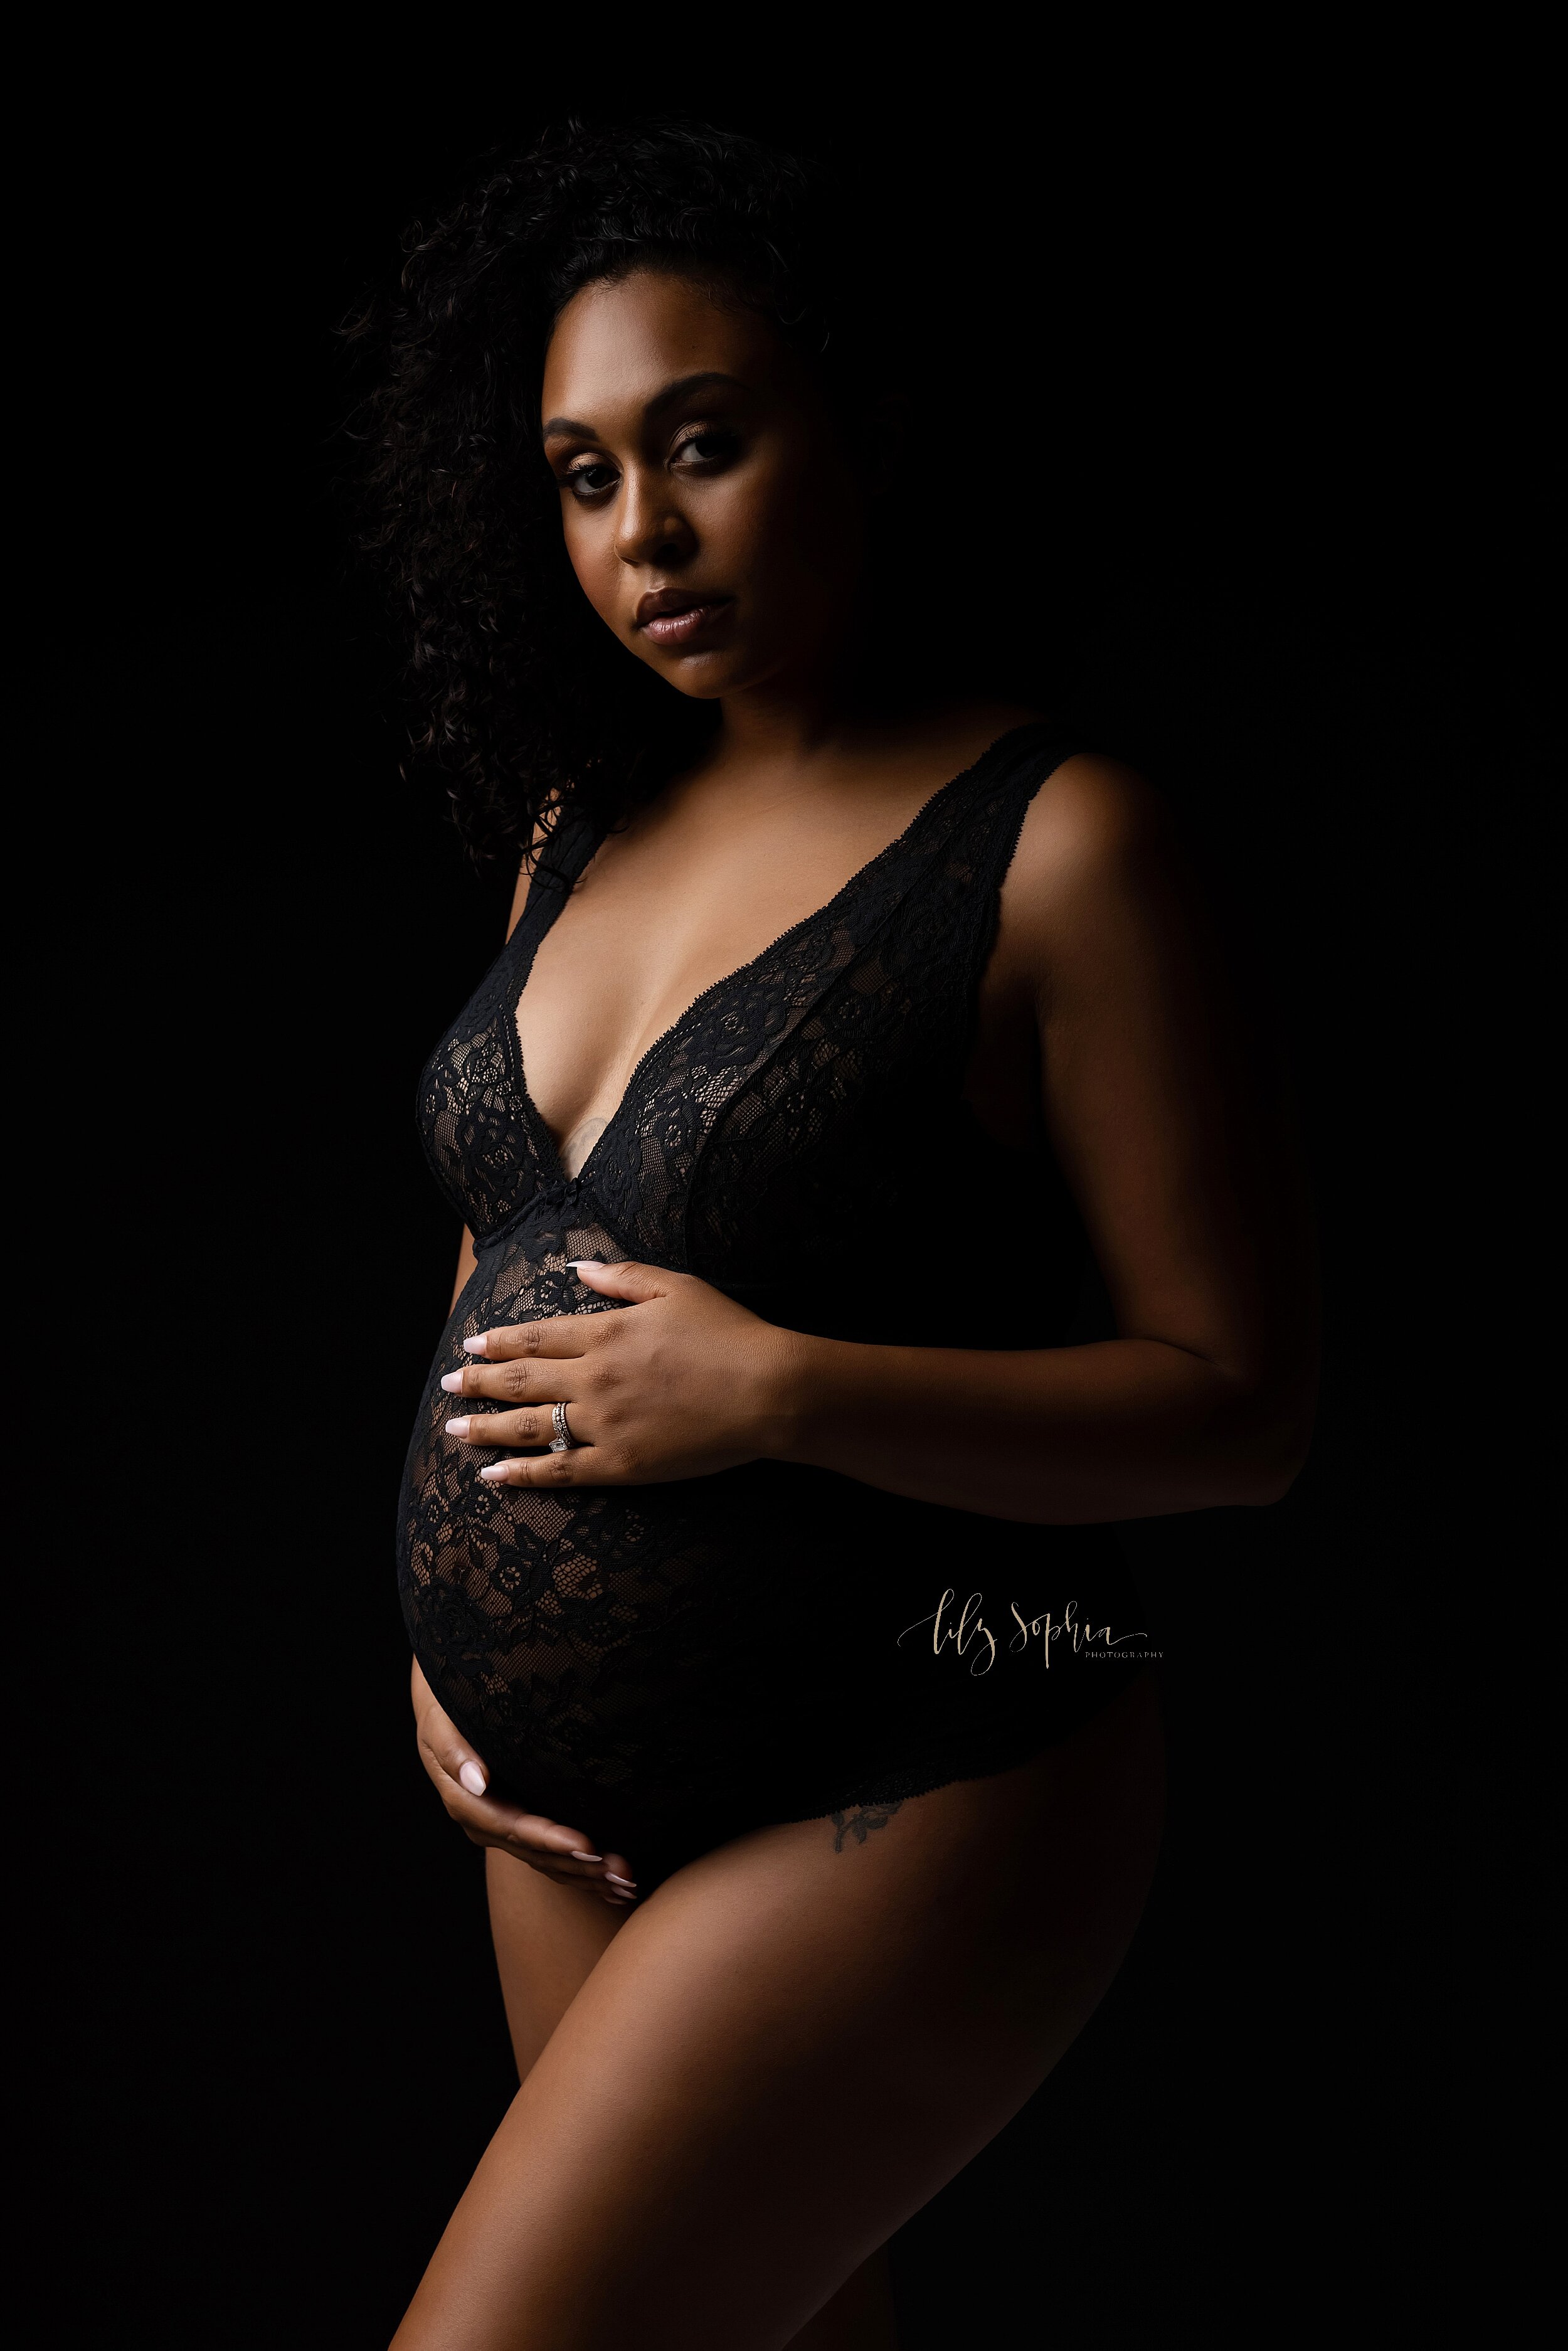  Dramatic fine art modern maternity image of a pregnant black woman with curly hair wearing a lace bodysuit, cradling her baby bump while looking serenely and confidently at the camera. Photo by Lily Sophia Photography located in Atlanta, Georgia.  